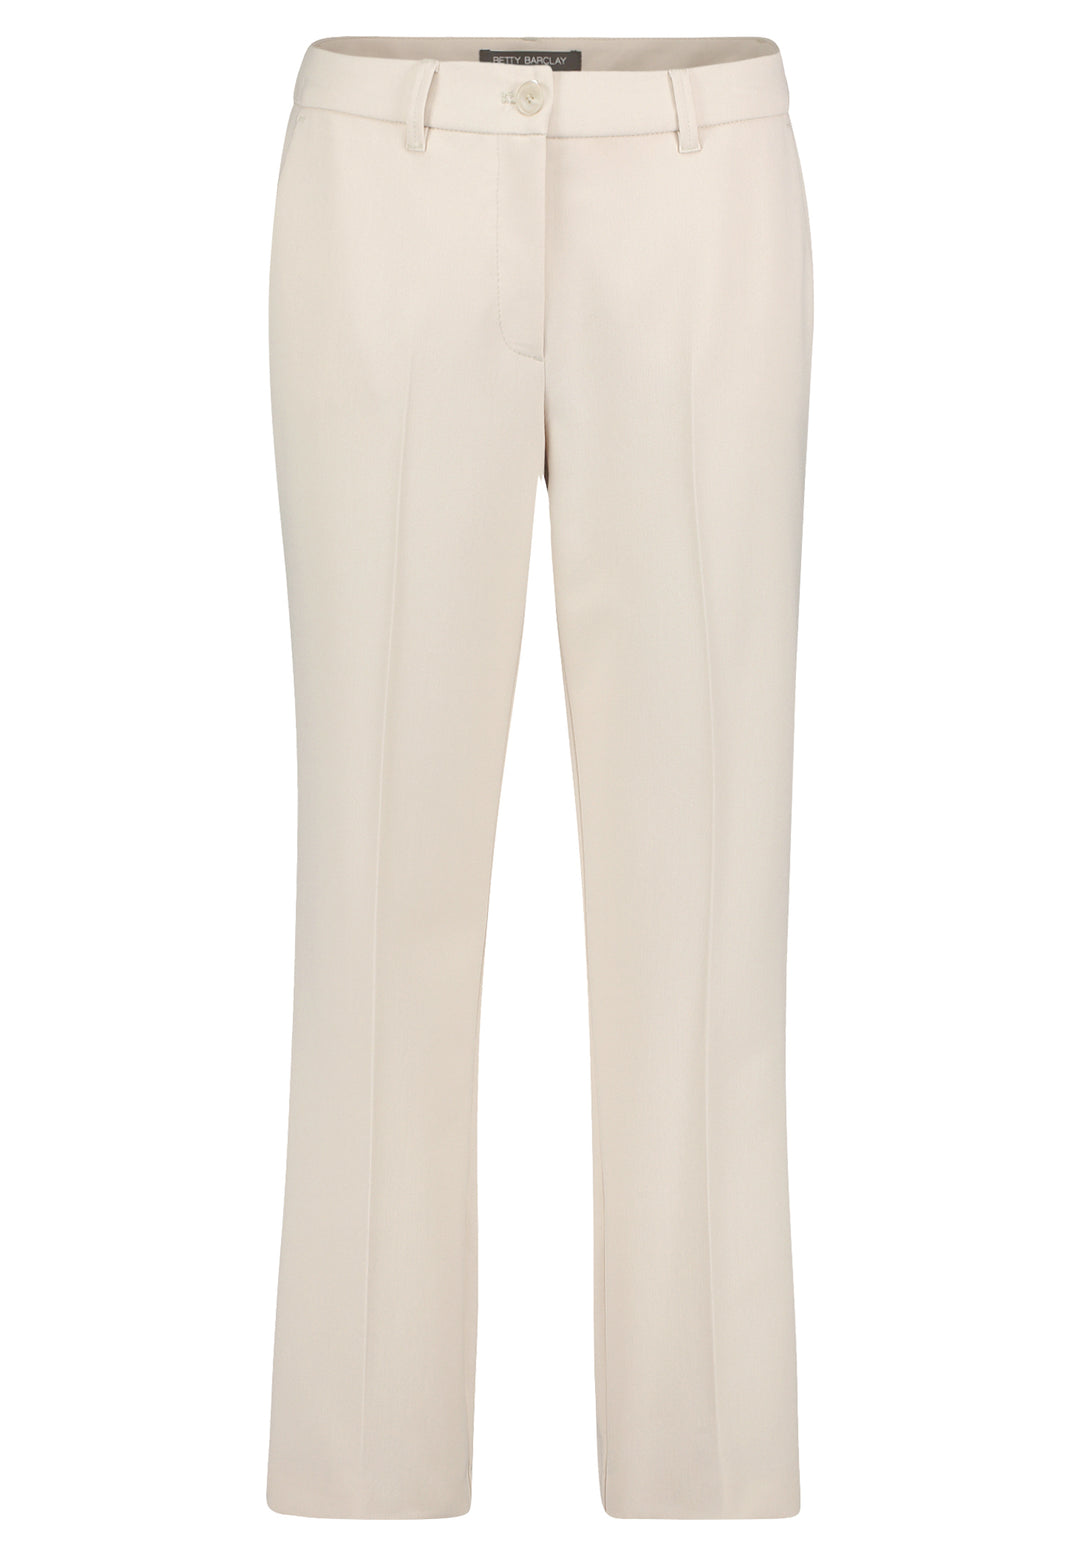 Betty Barclay 6704 1080 9104 Classic 3/4 Trouser Sand 3